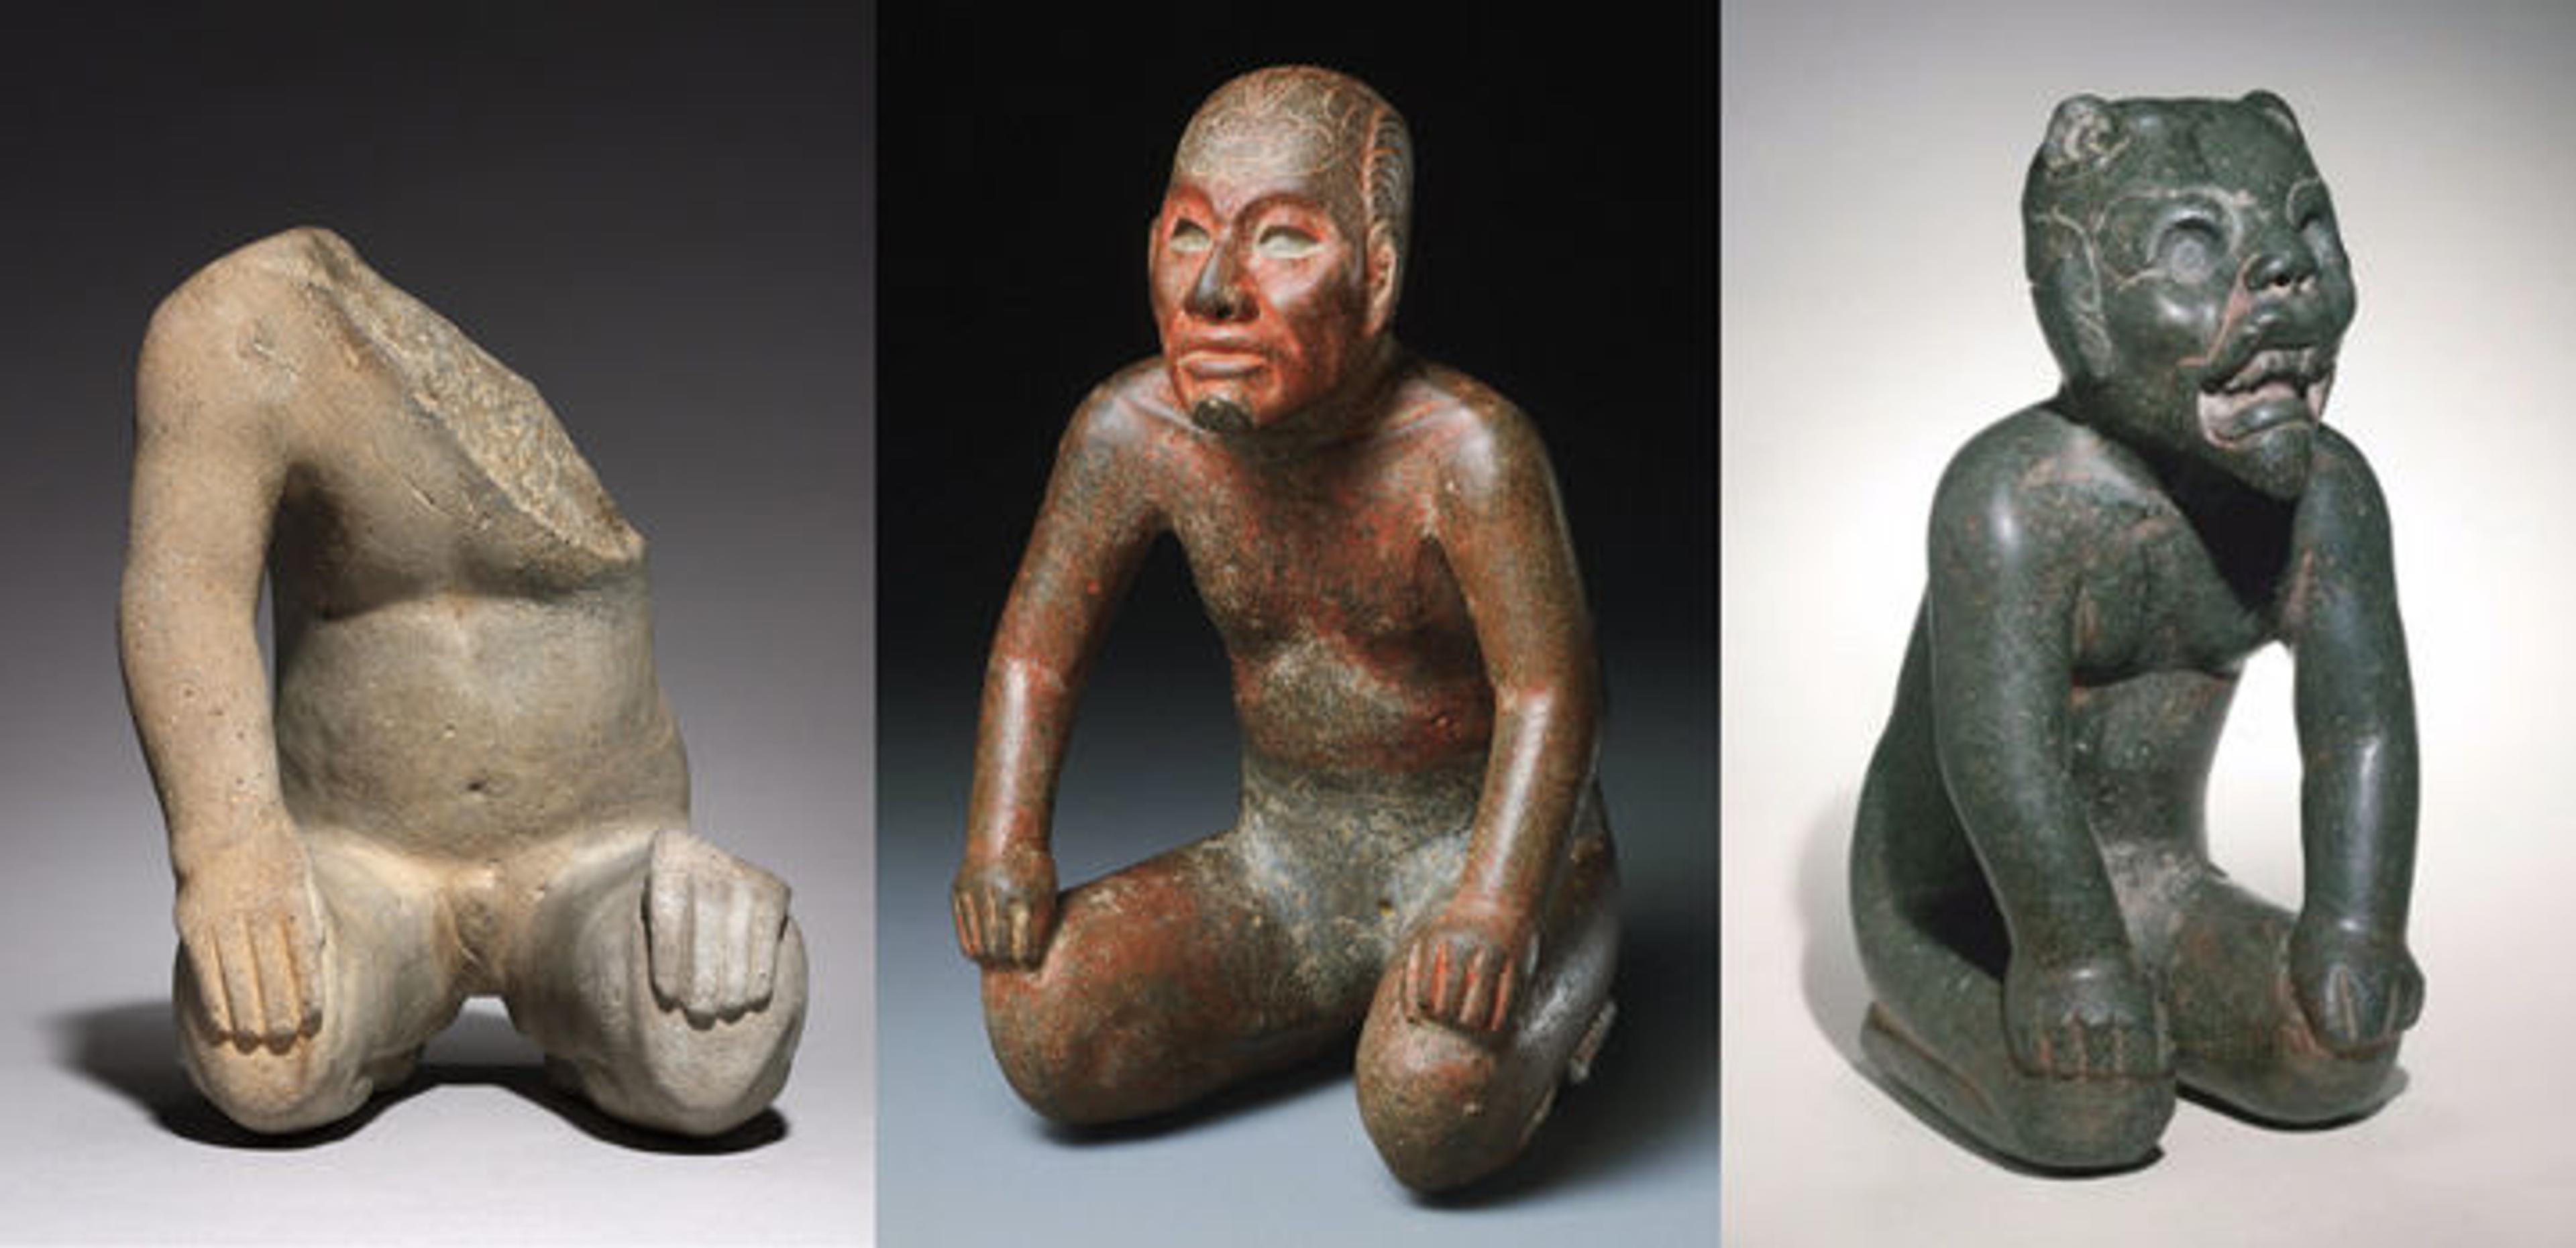 Three examples of various Mexican kneeling figure sculptures from three museum collections